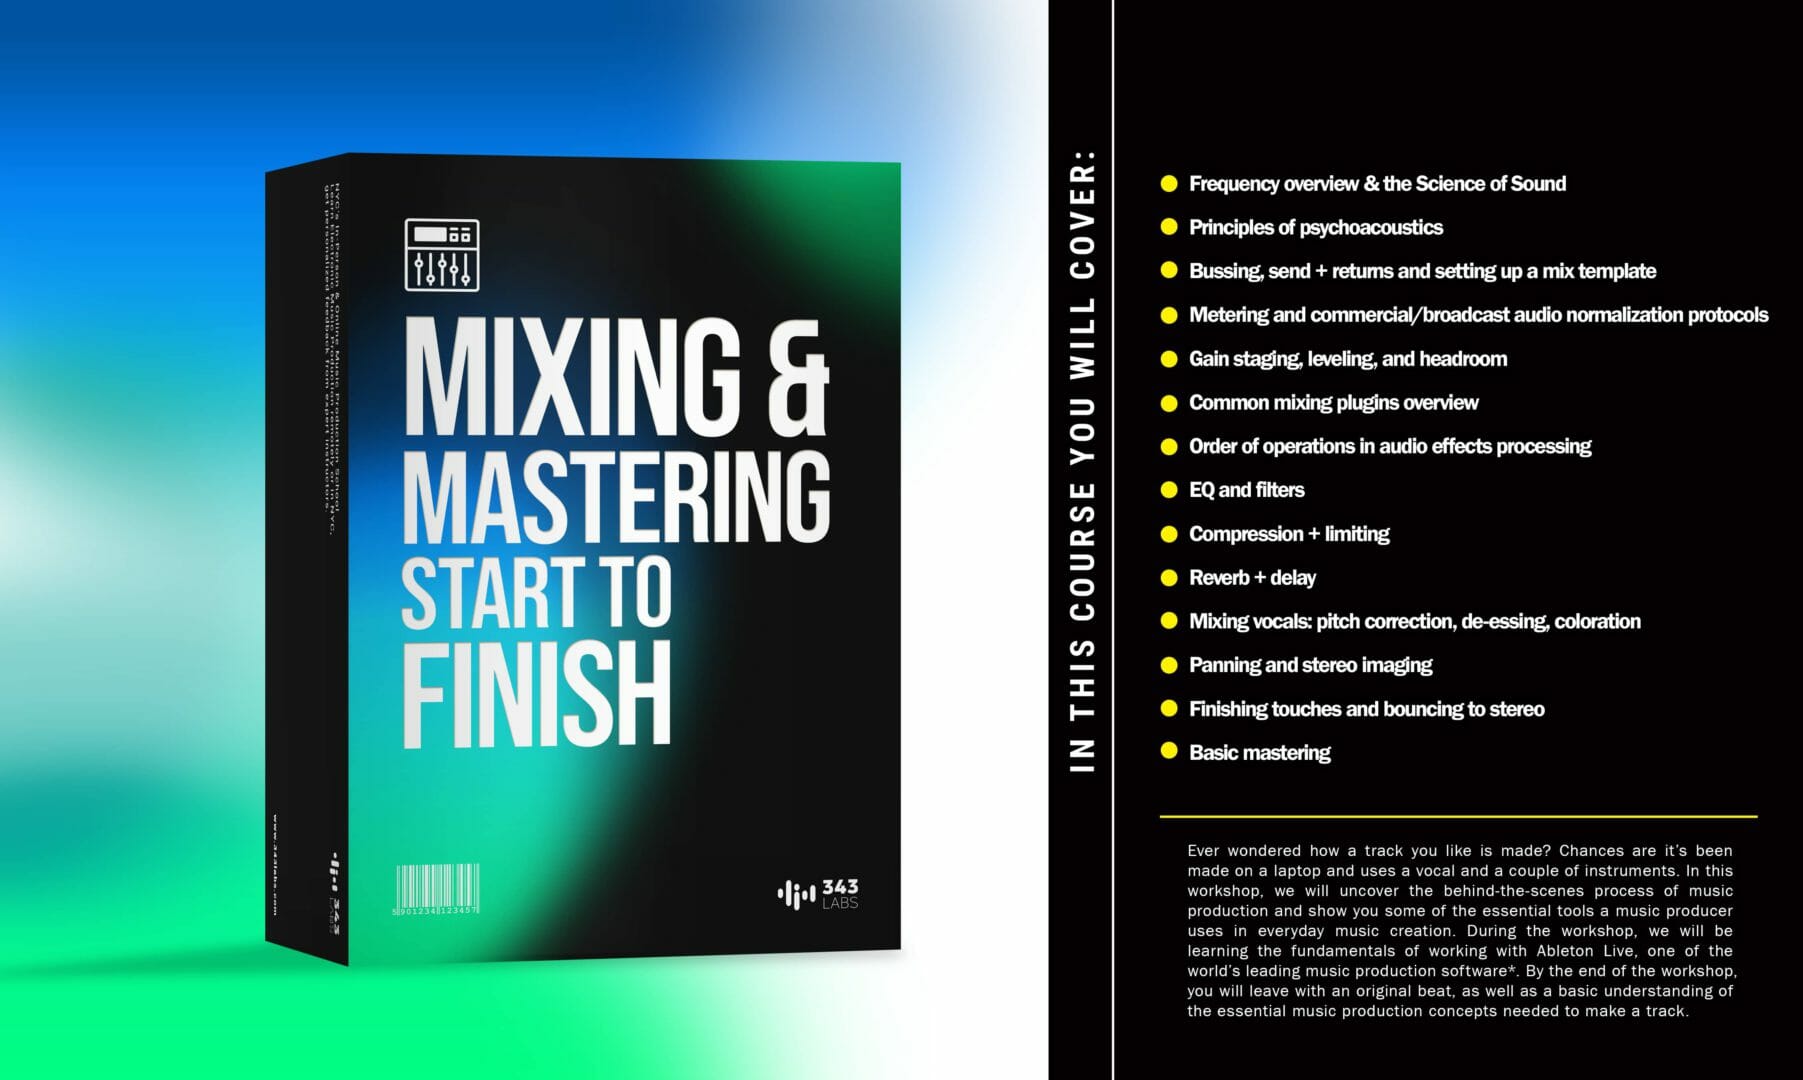 343LABS_class NYC mixing and mastering start to finish